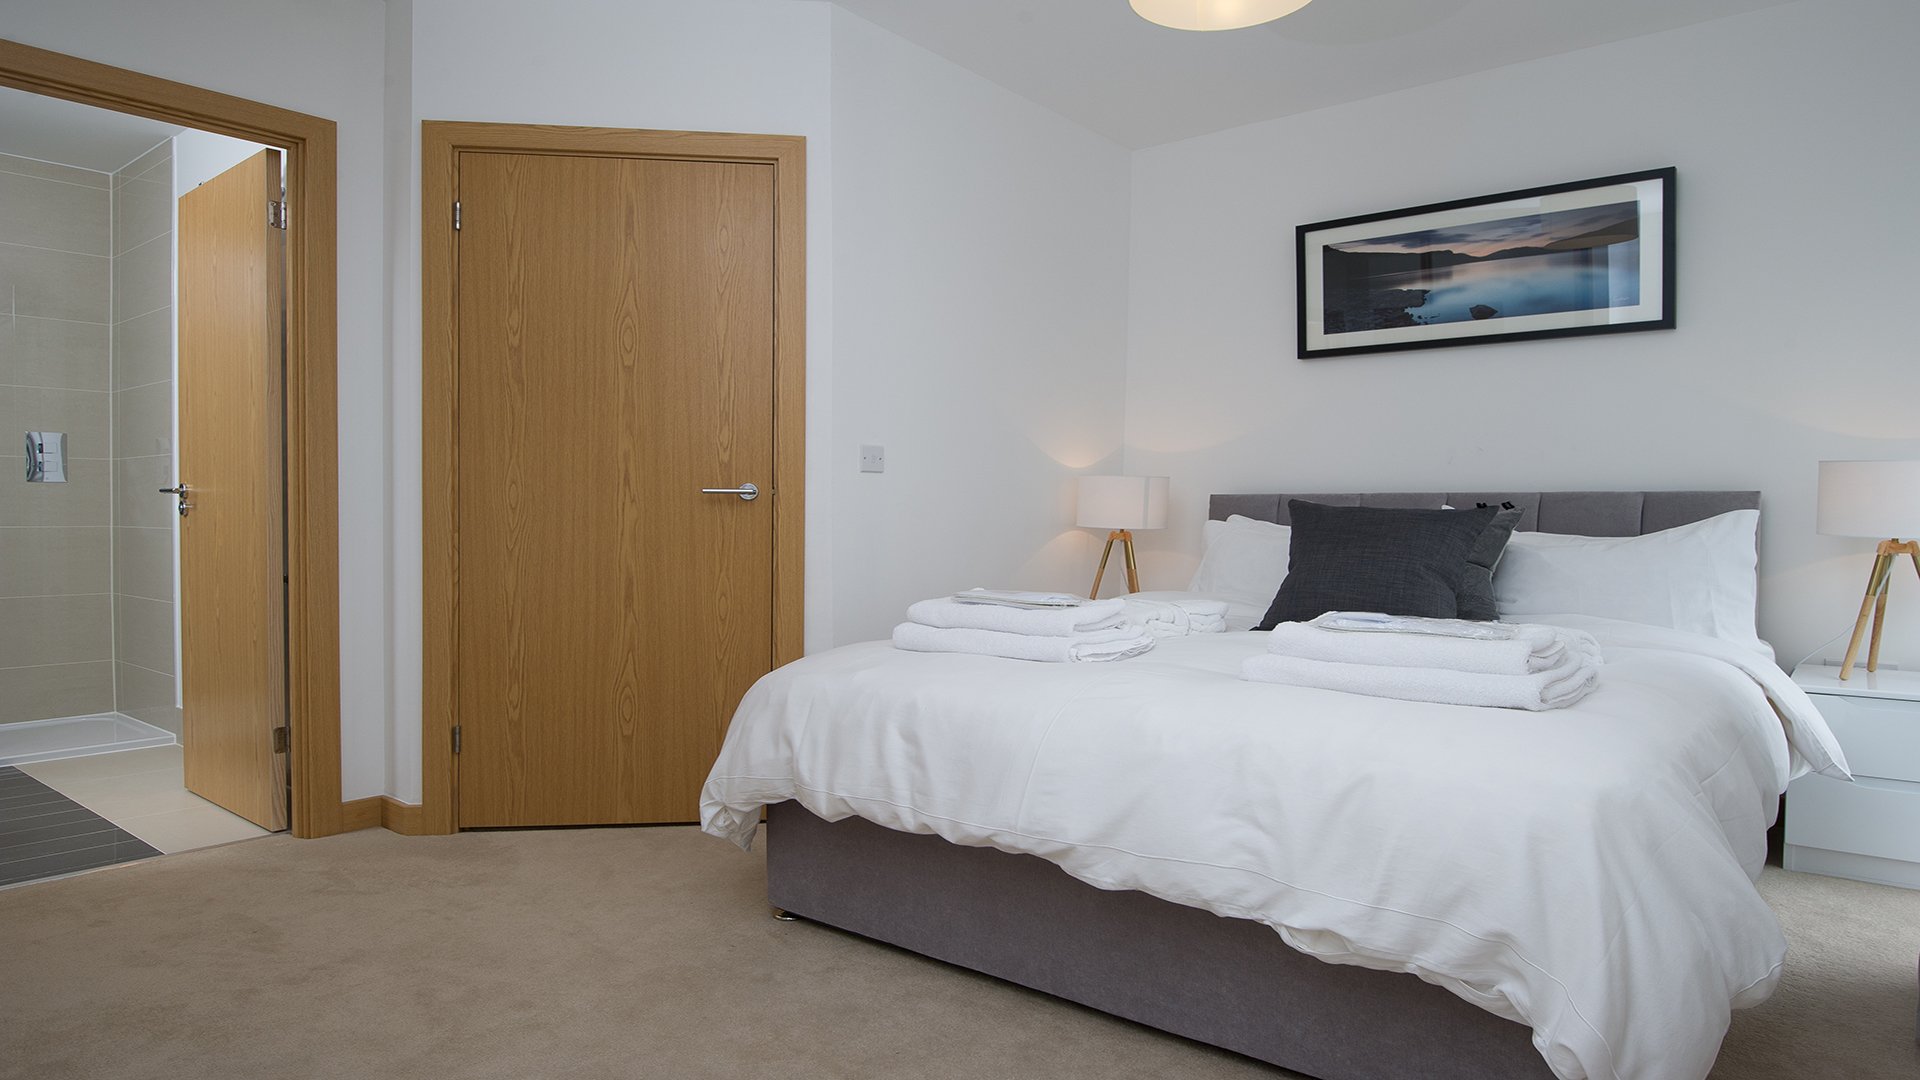 Cambridge-Short-Let-Apartments-avilable-Now!!-Book-Corporate-Serviced-Accommodation-in-Cambridge-today!-Free-Cleaning,-Wifi-&-Netflix!!-Pet-Friendly-|-Urban-Stay